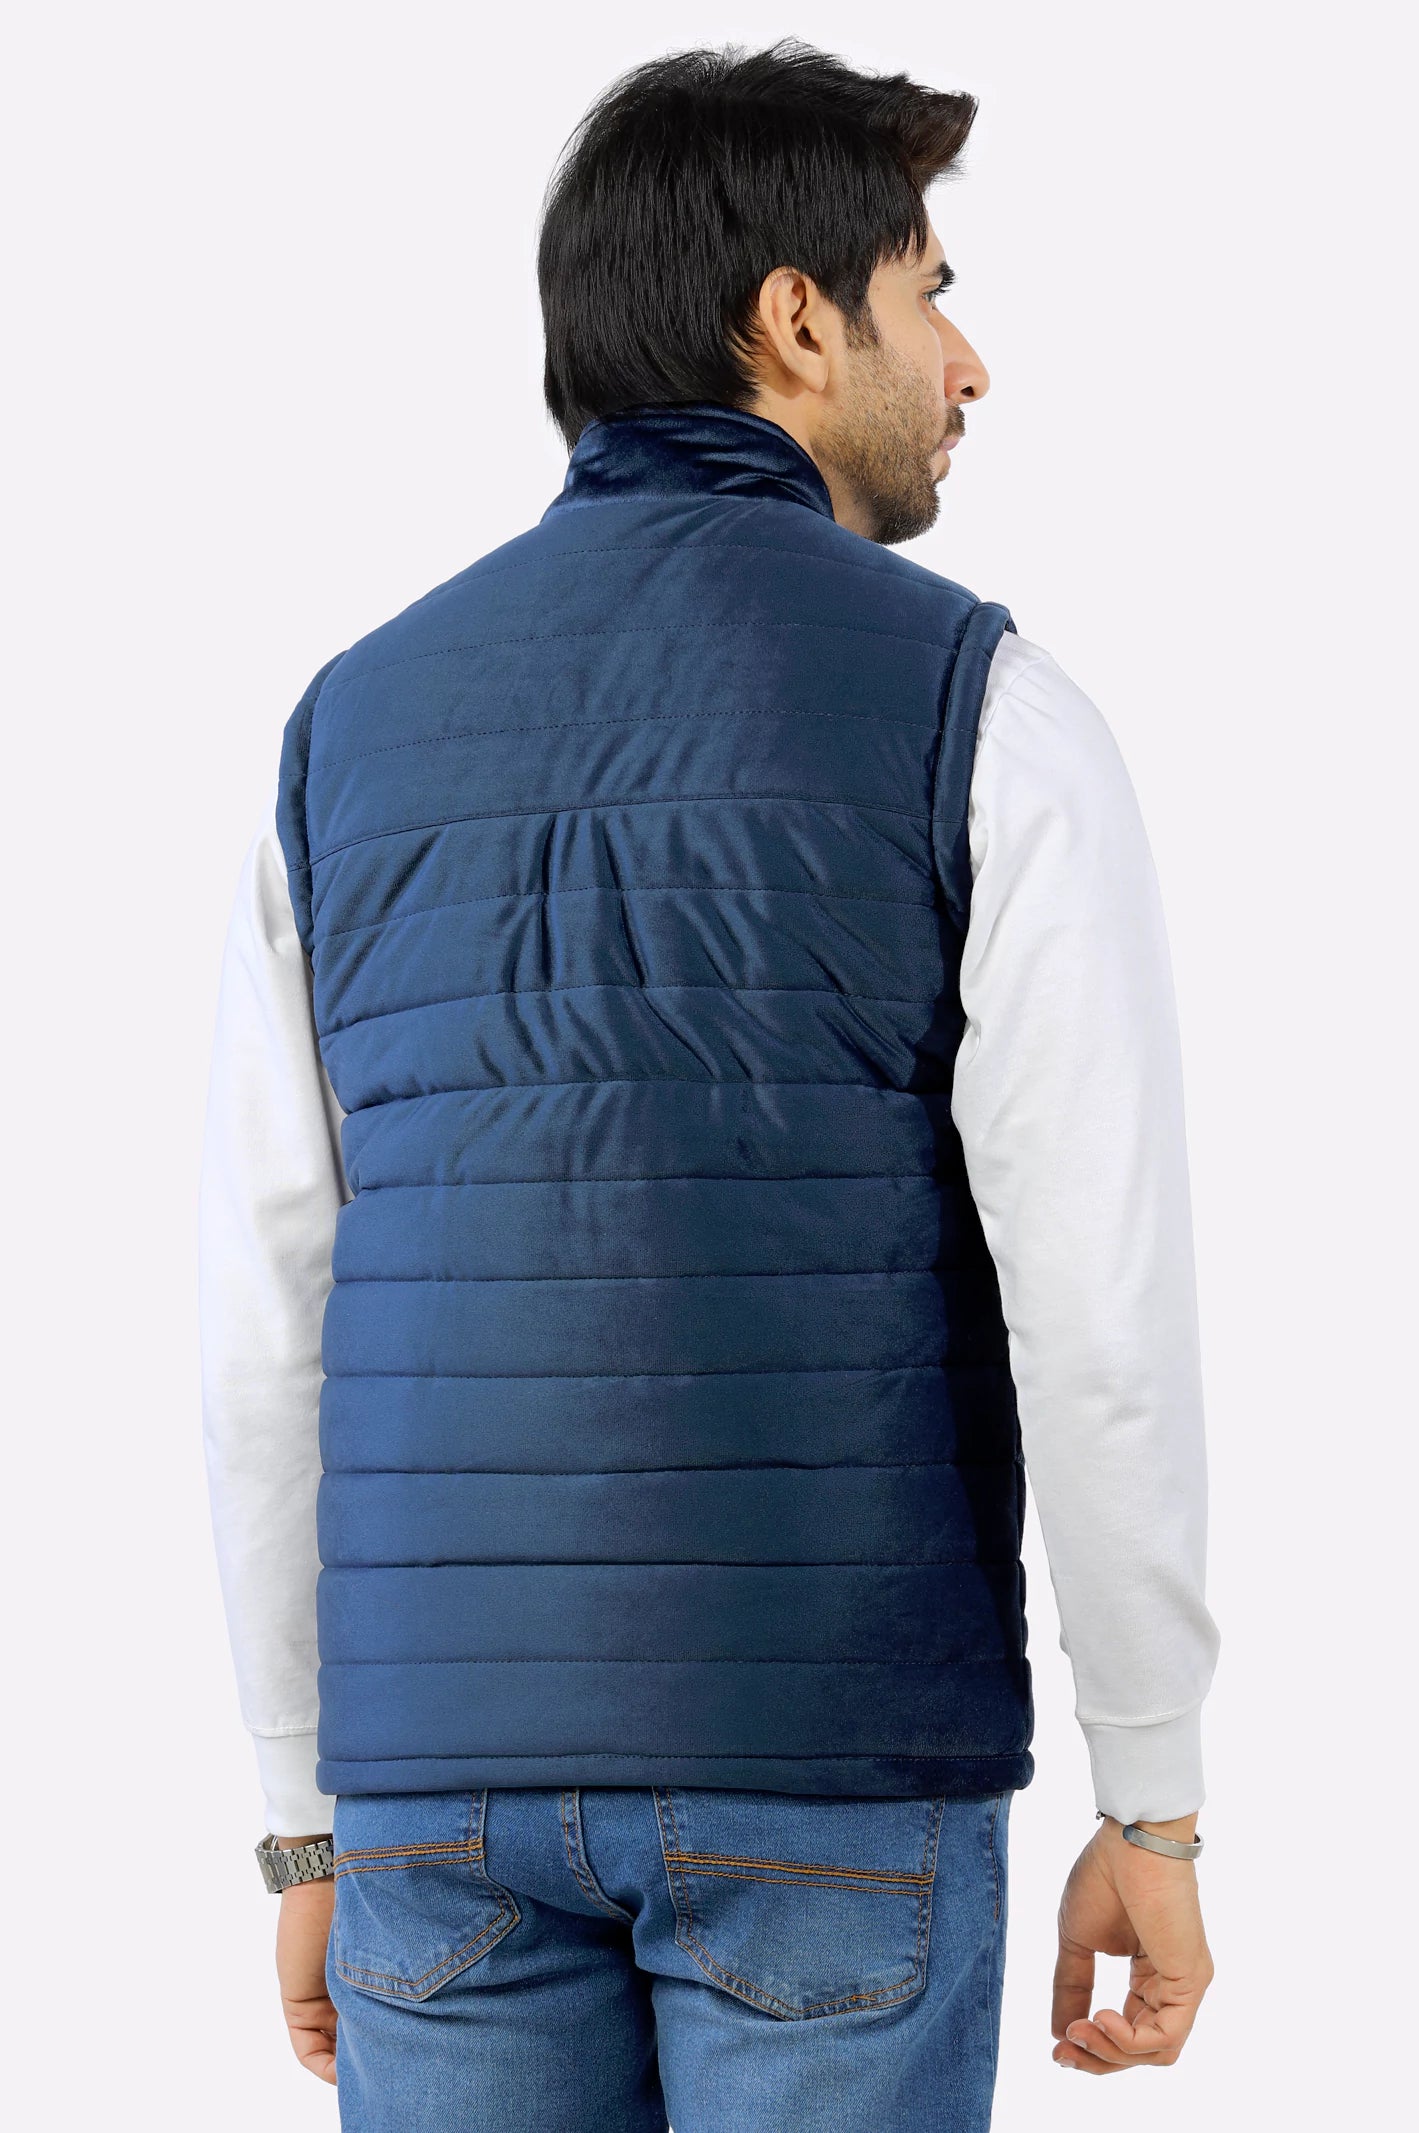 Navy Blue Sleeveless Men's Jacket From Diners